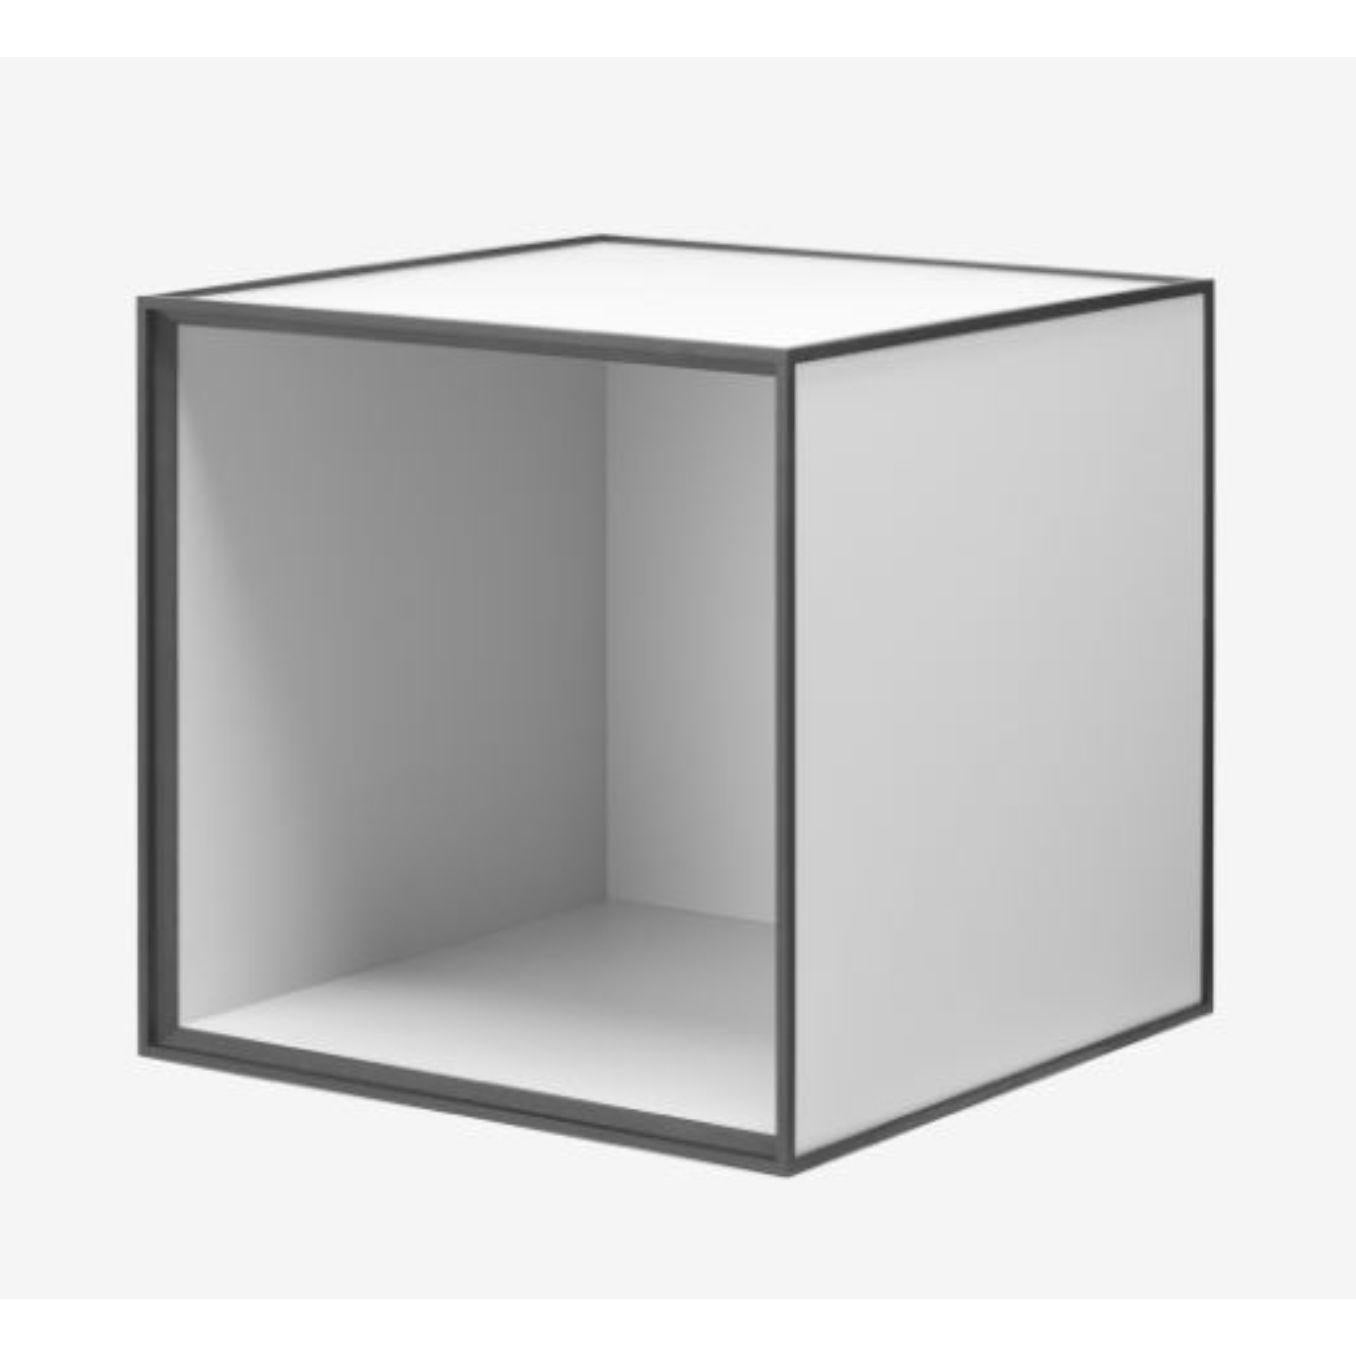 28 light grey frame box by Lassen
Dimensions: w 28 x d 28 x h 28 cm 
Materials: Finér, Melamin, Melamin, Melamine, Metal, Veneer, Oak
Also available in different colors and dimensions. 

By Lassen is a Danish design brand focused on iconic